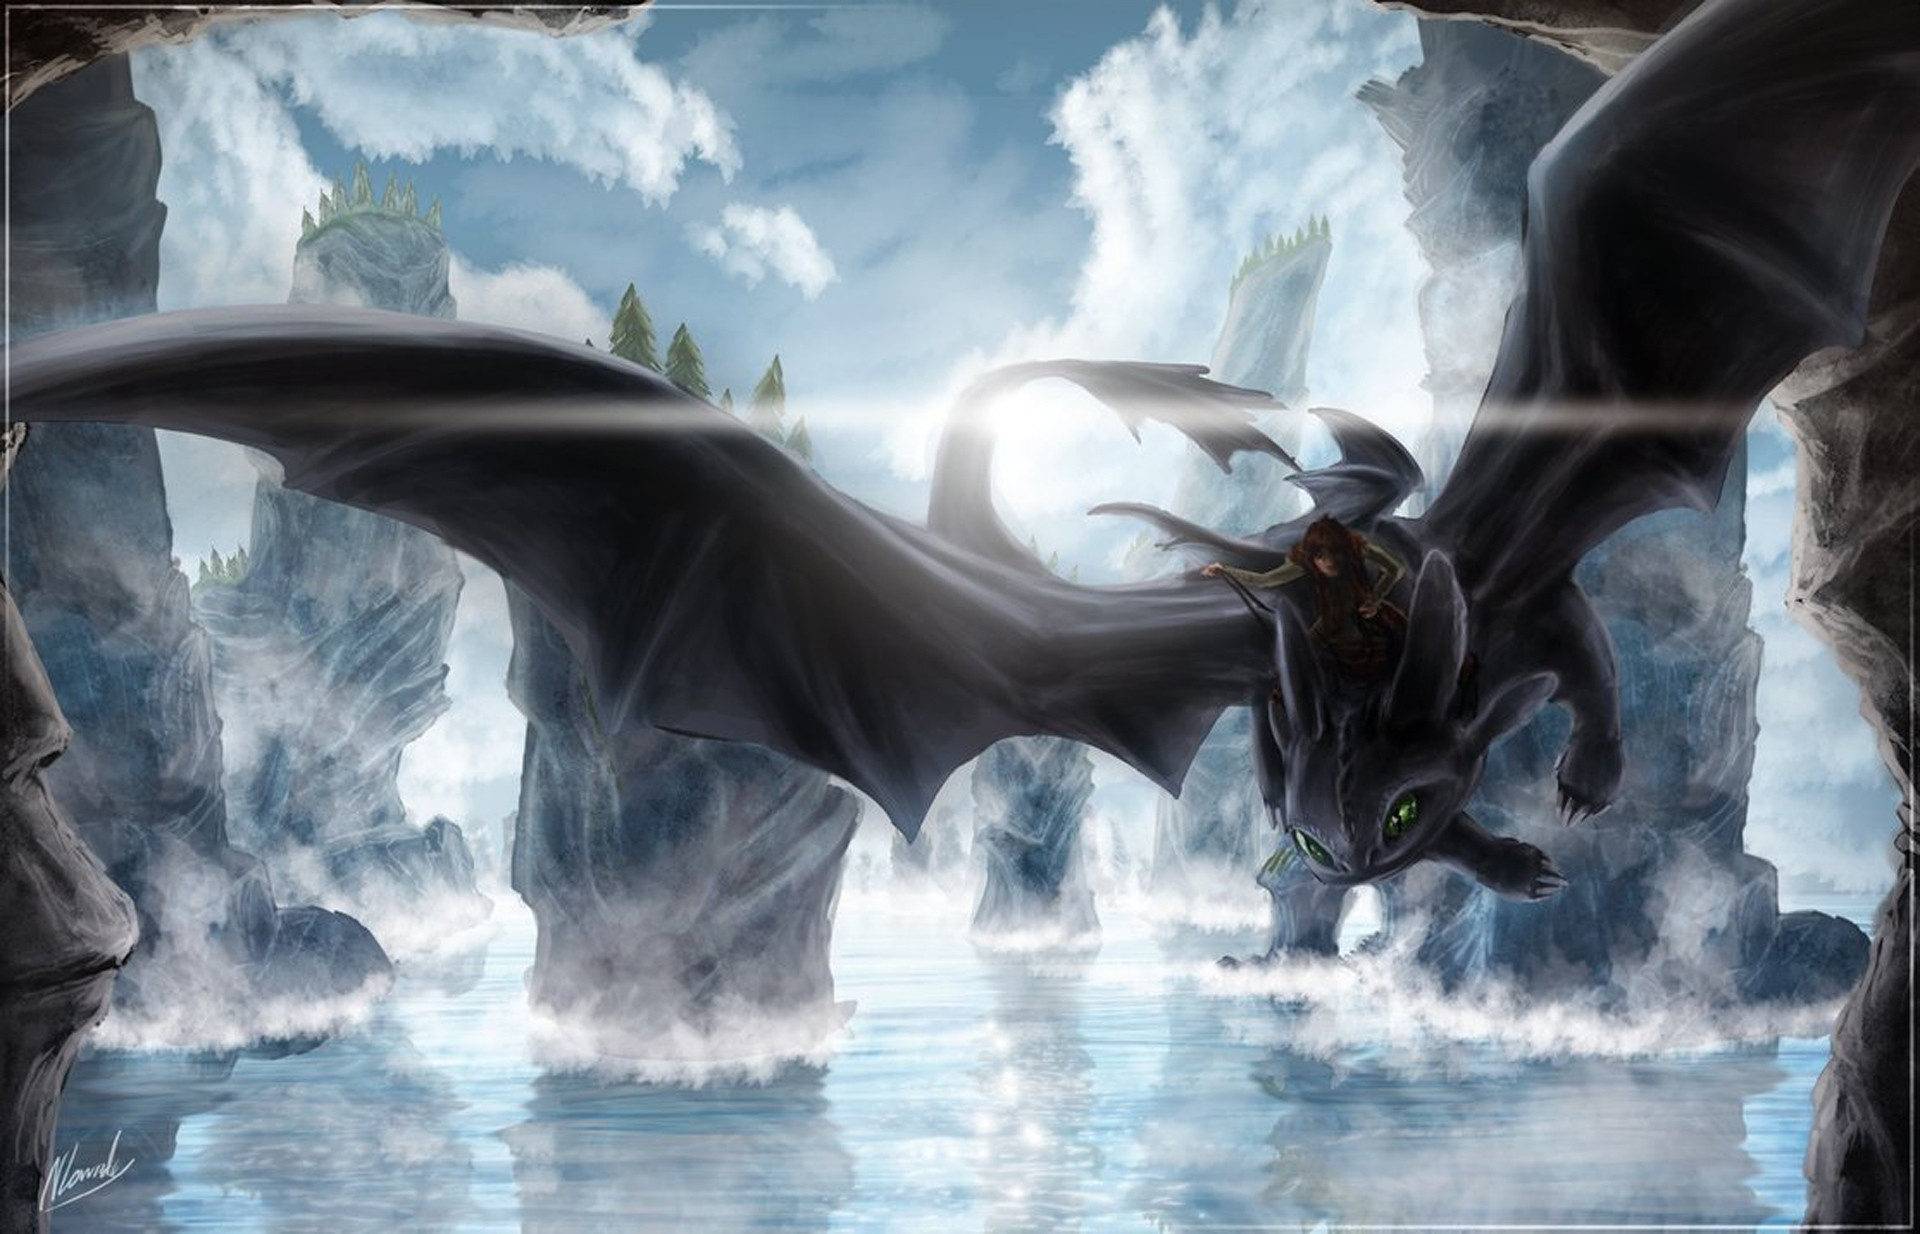 1920x1234 (604,73 Kb Mobile Compatible) How To Train Your Dragon 2 Backgrounds